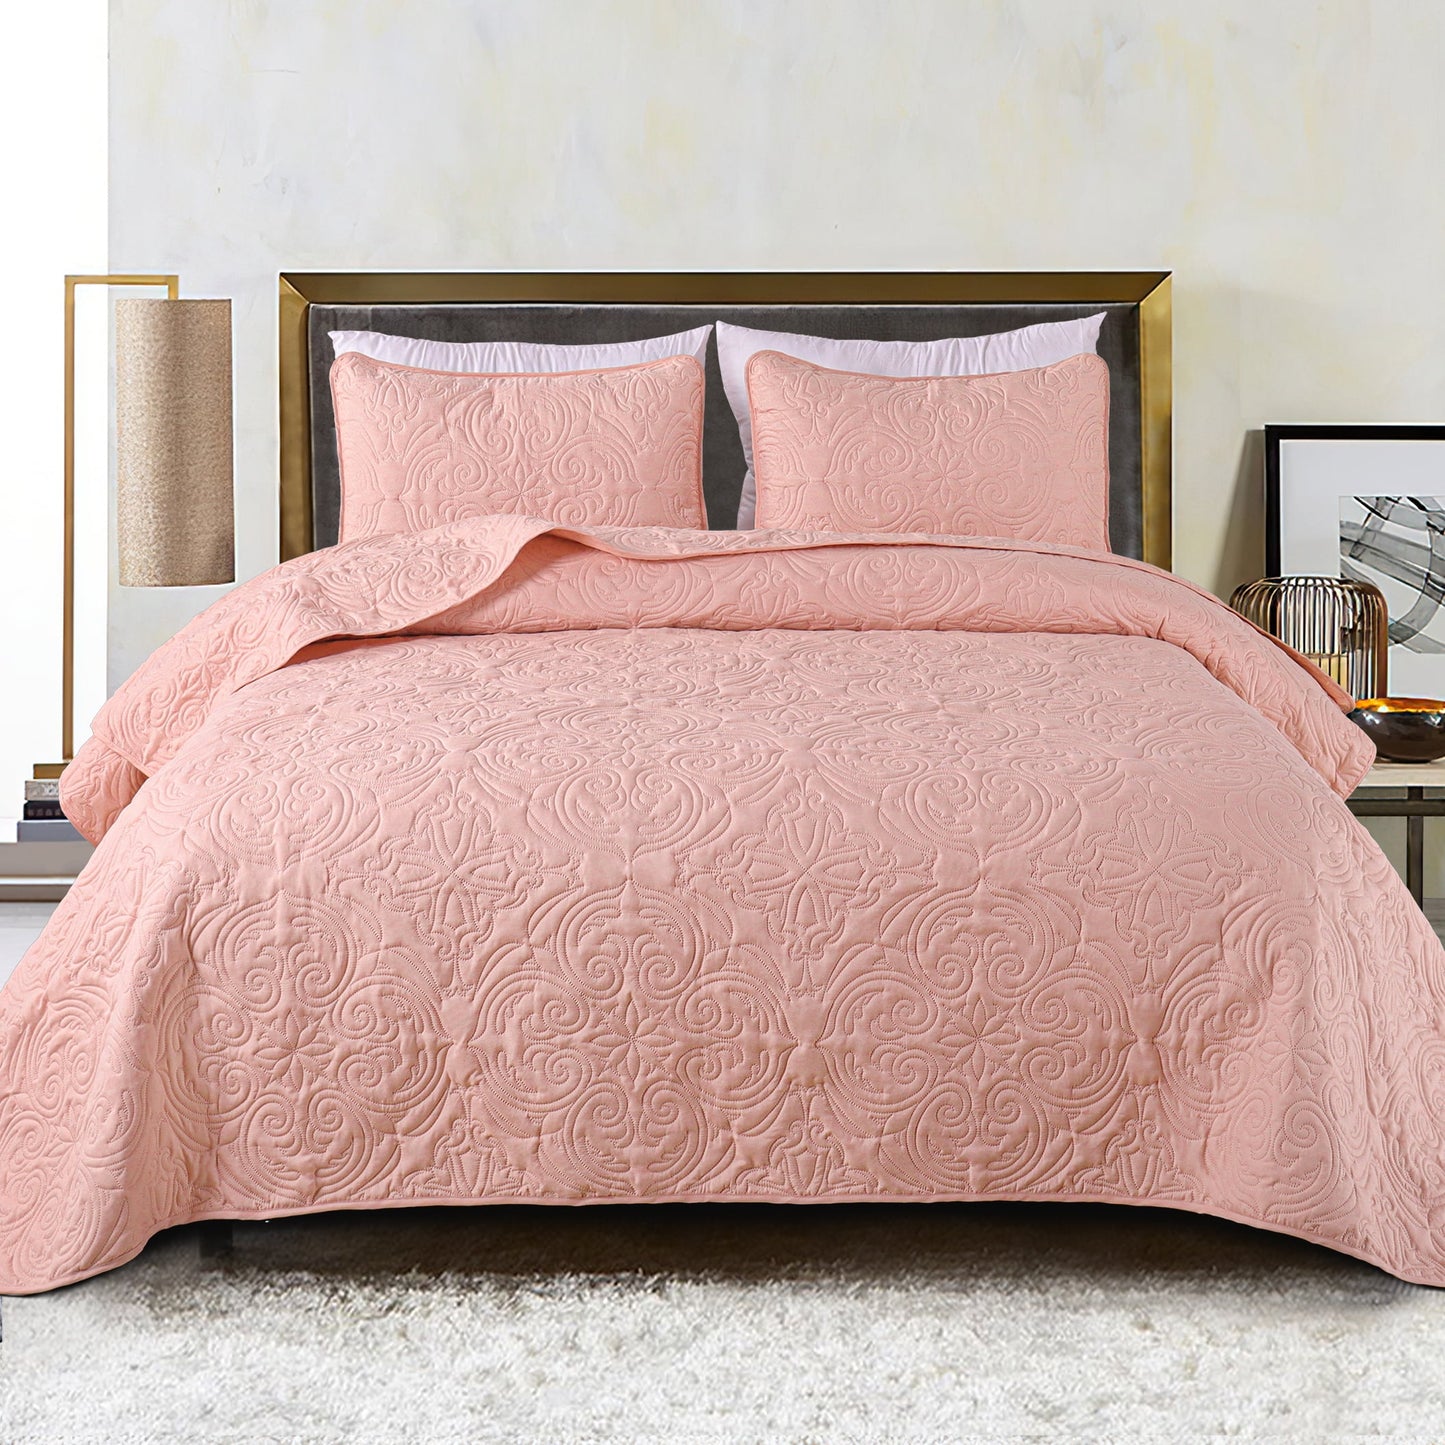 Exclusivo Mezcla Oversized King Quilt Bedding Set, Lightweight Vintage California Cal King Size Quilts with Pillow Shams, Soft Bedspreads Coverlets for All Seasons, (112"x104", Blush Pink)